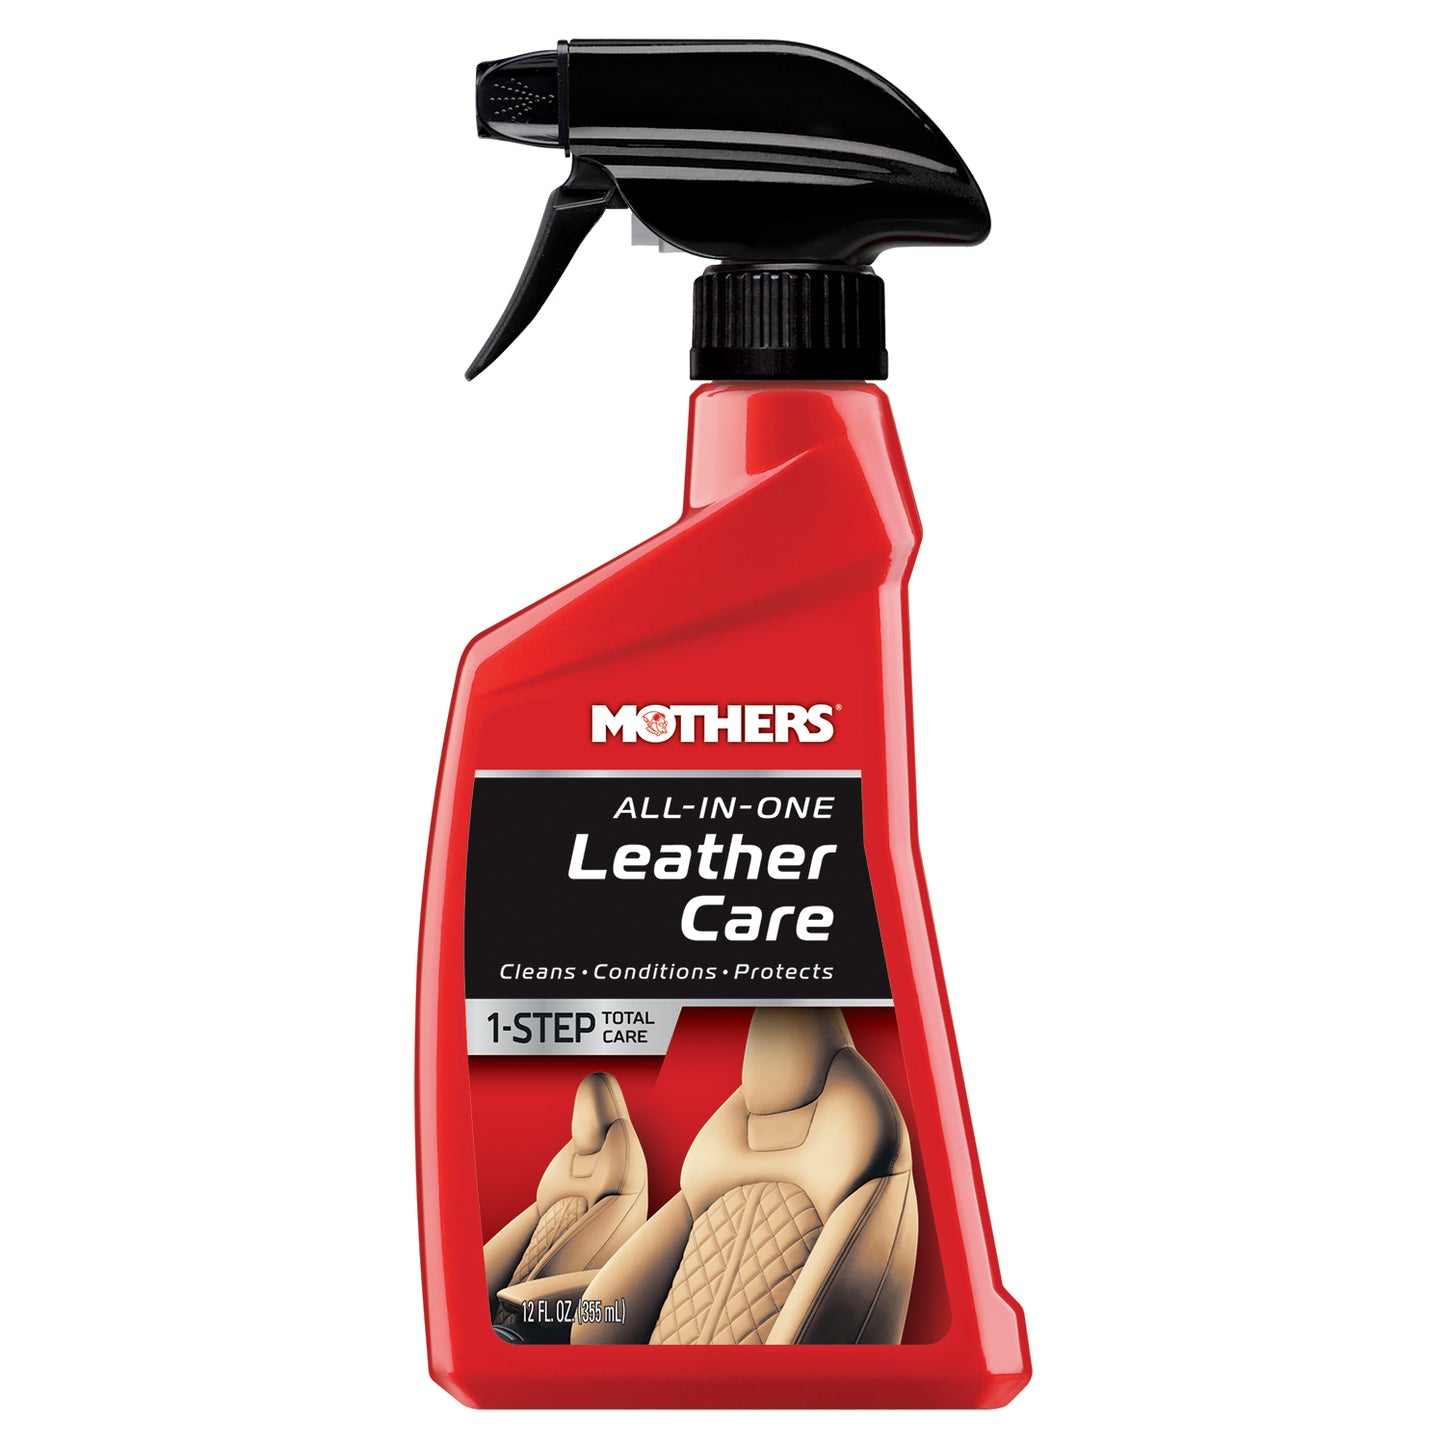 Mothers All-In-One Leather Care